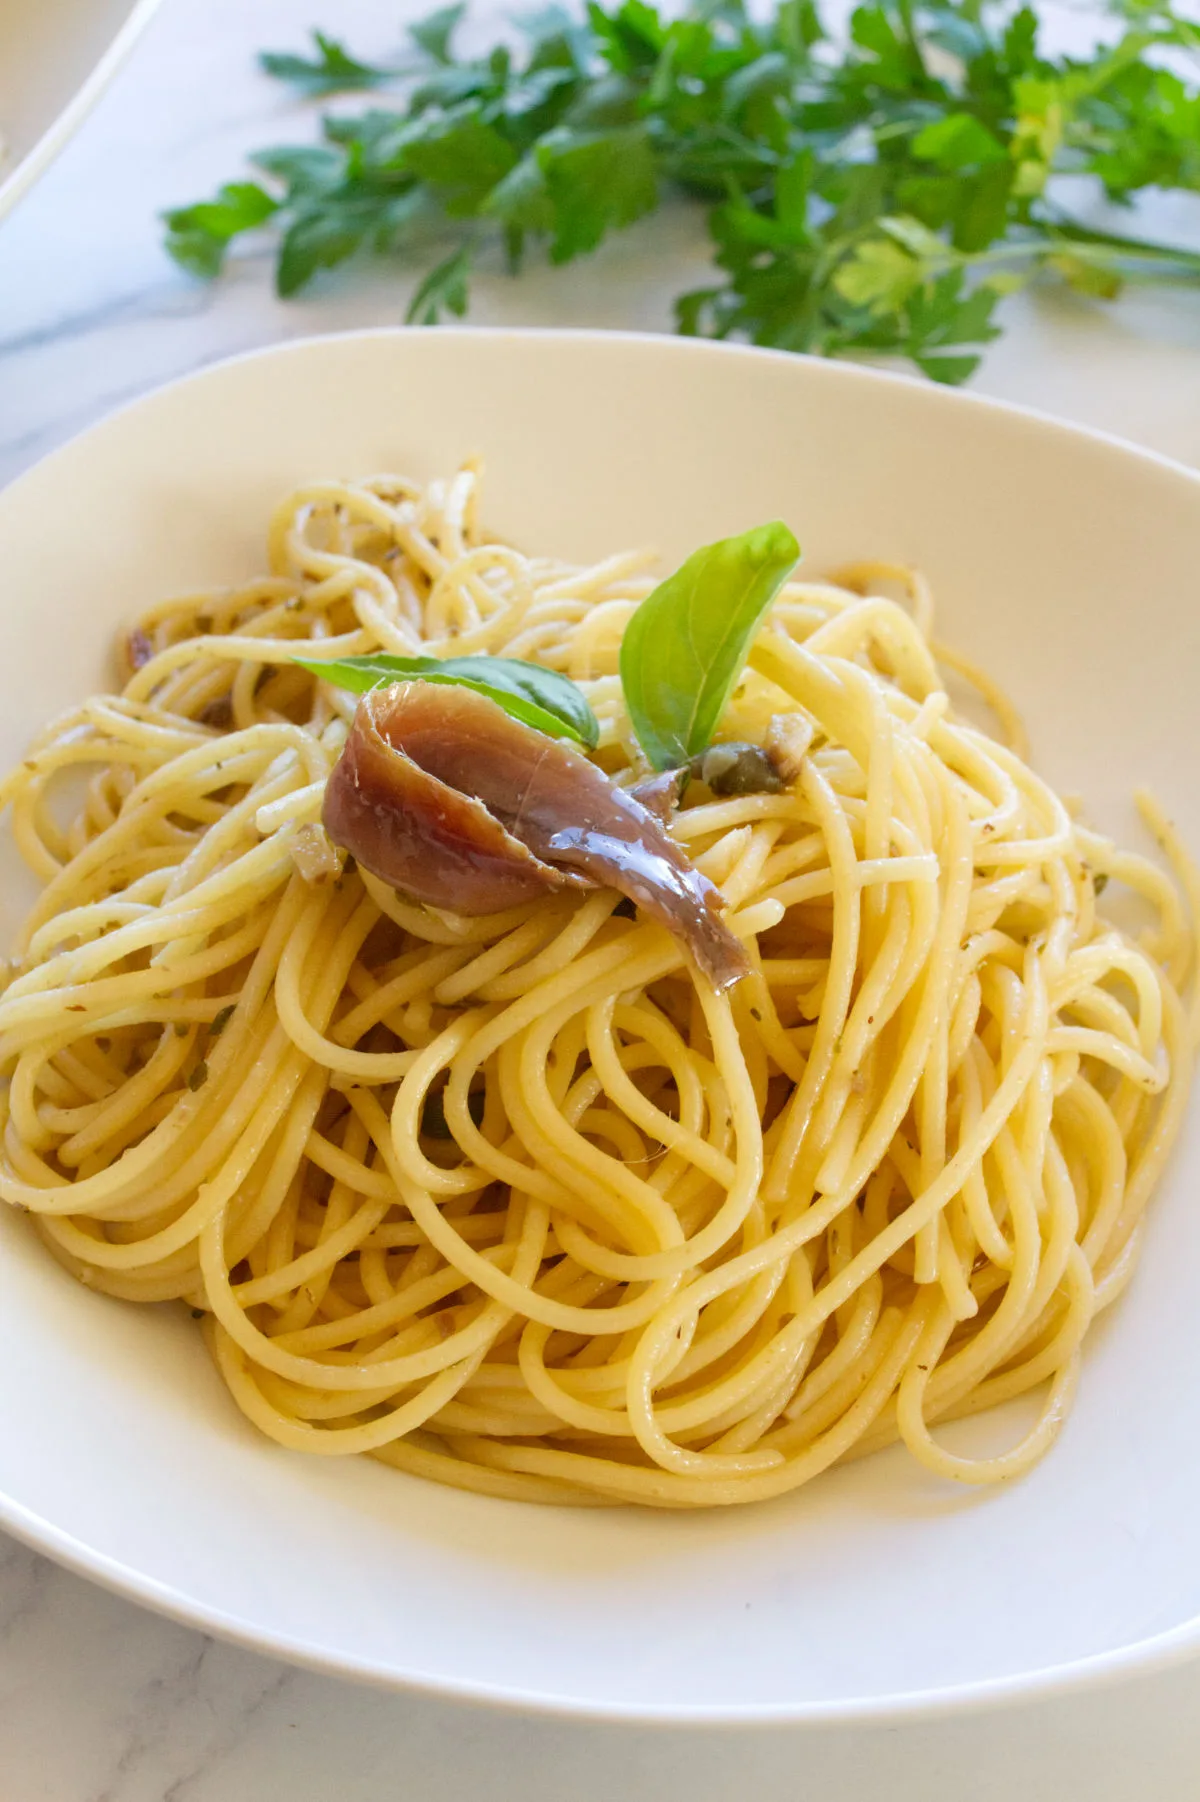 A bowl of Spaghetti with anchovies and capers is garnished with fresh basil leaves and an anchovie fillet.